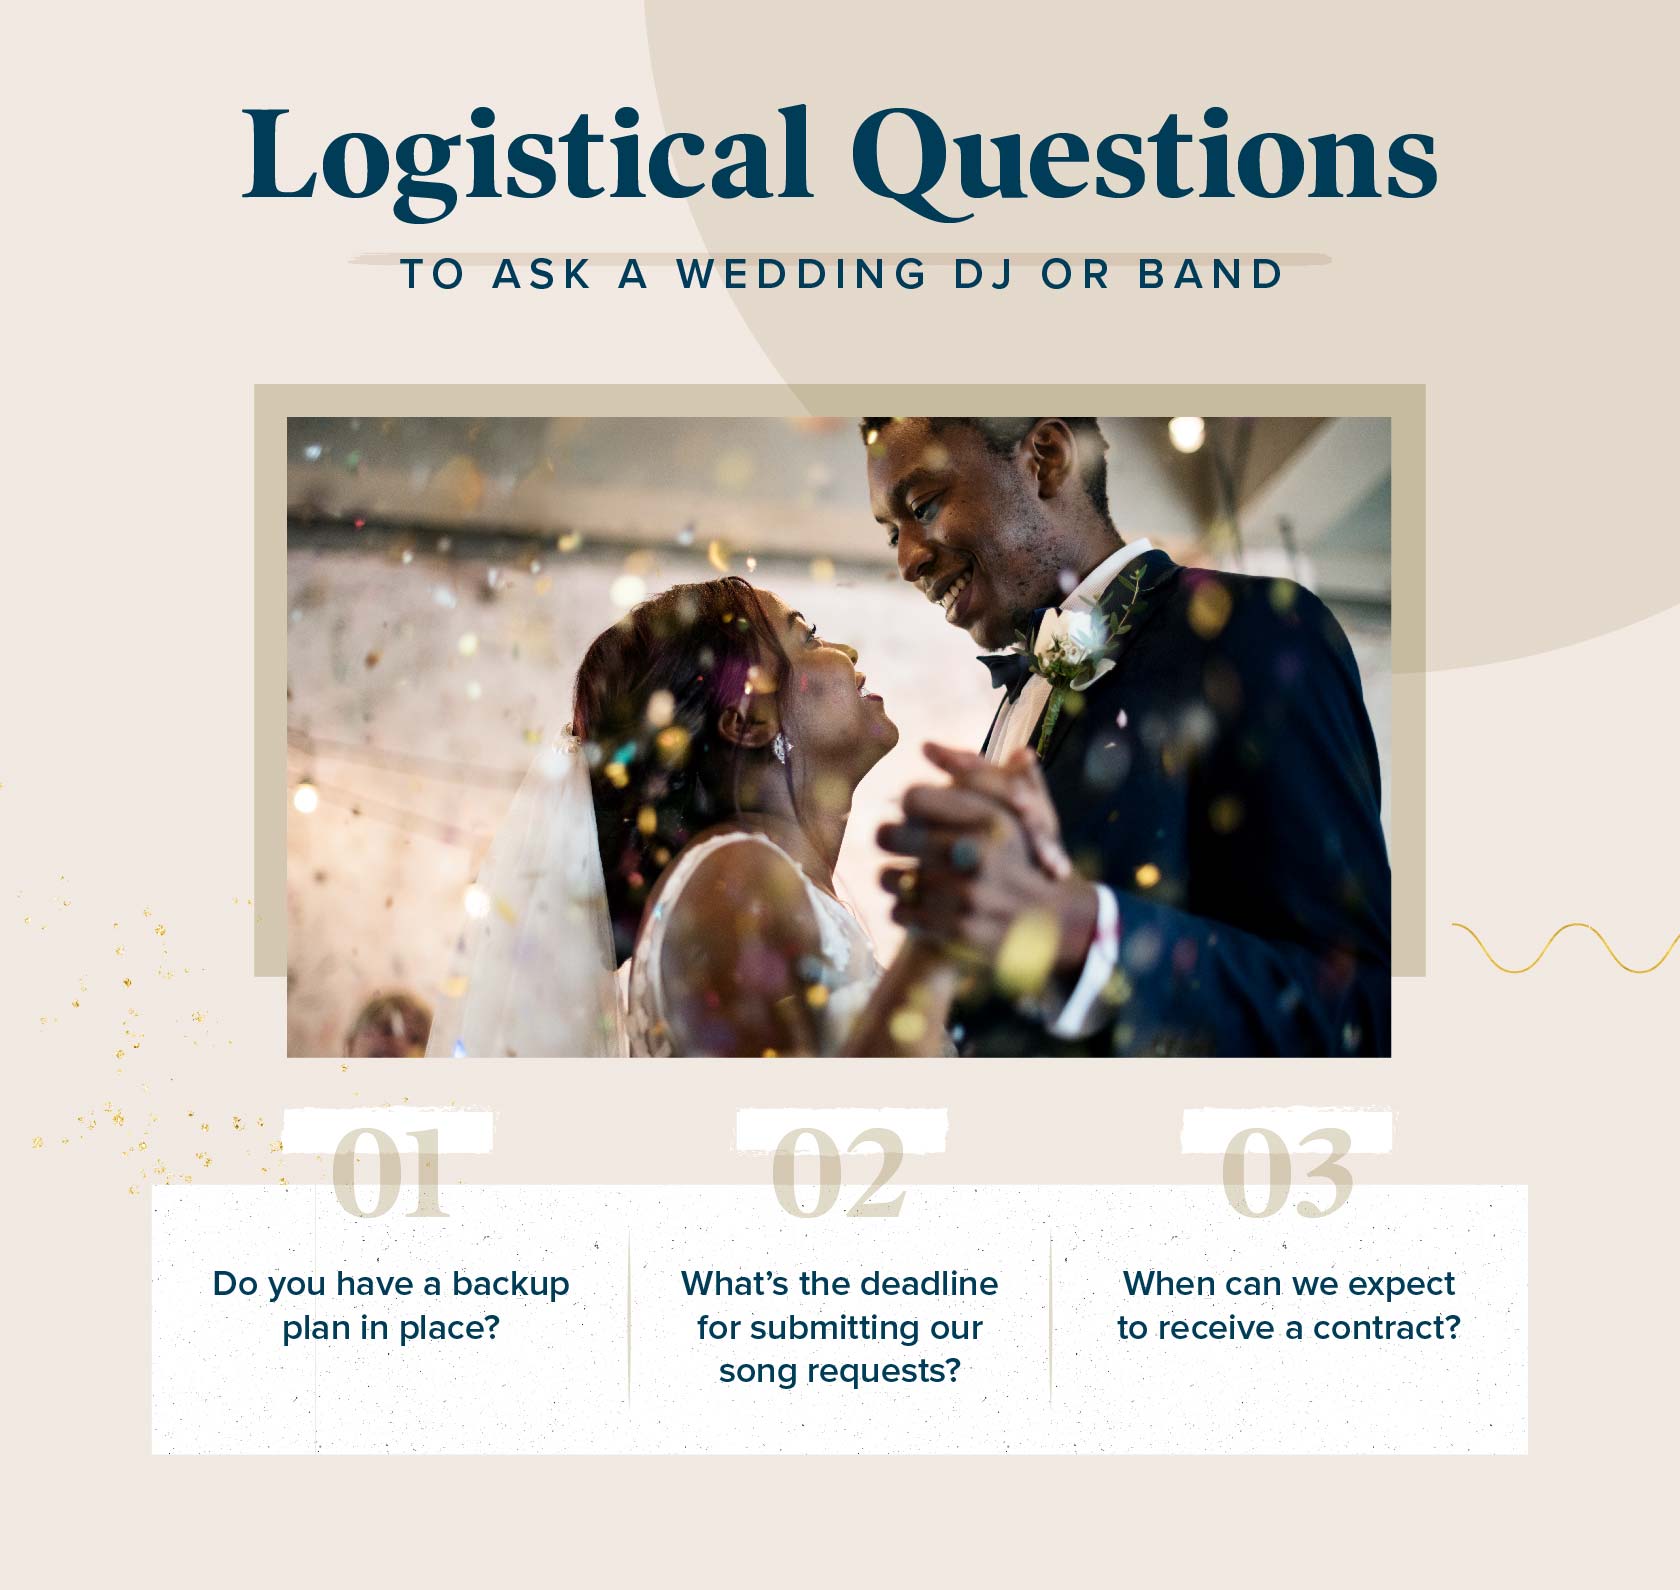 logistical-questions-to-ask-wedding-dj-or-band